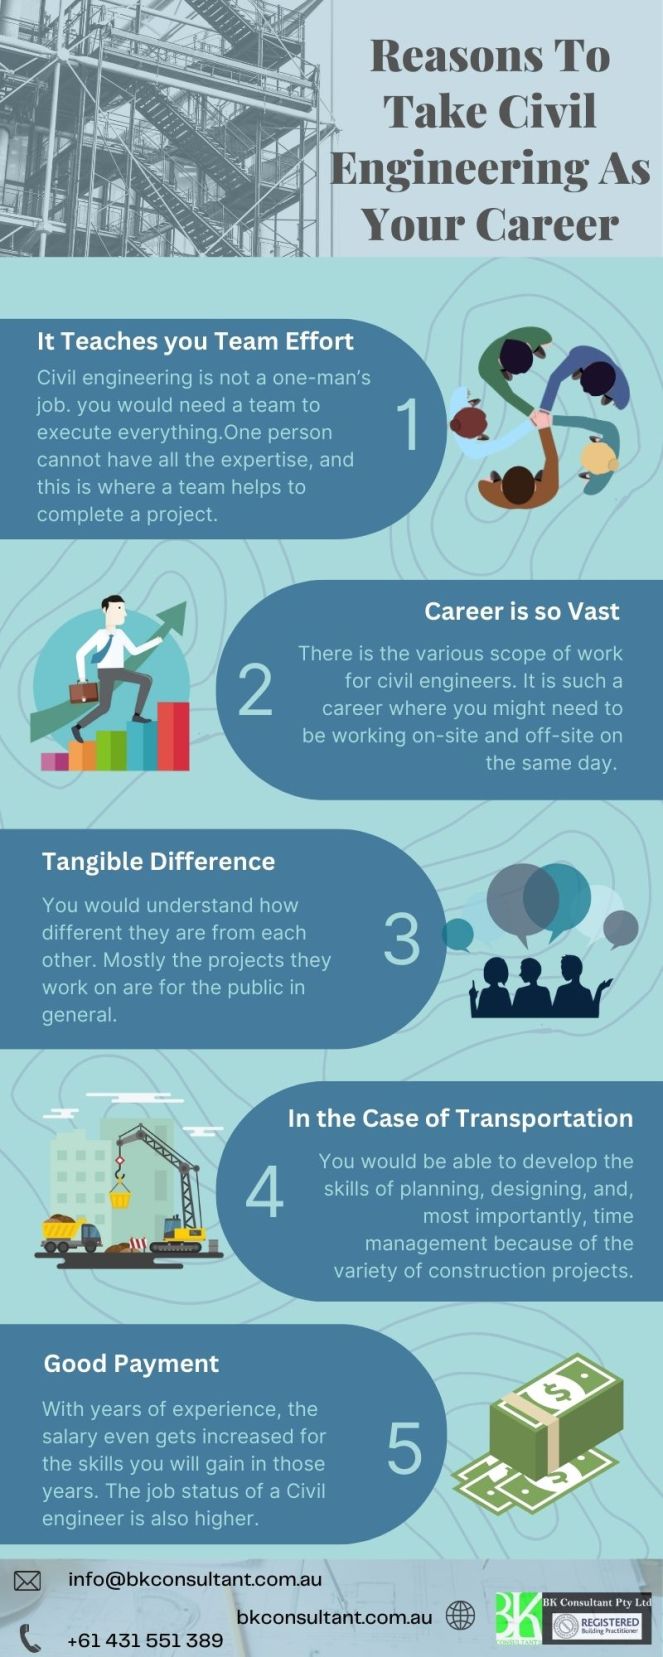 Reasons To Take Civil Engineering As Your Career